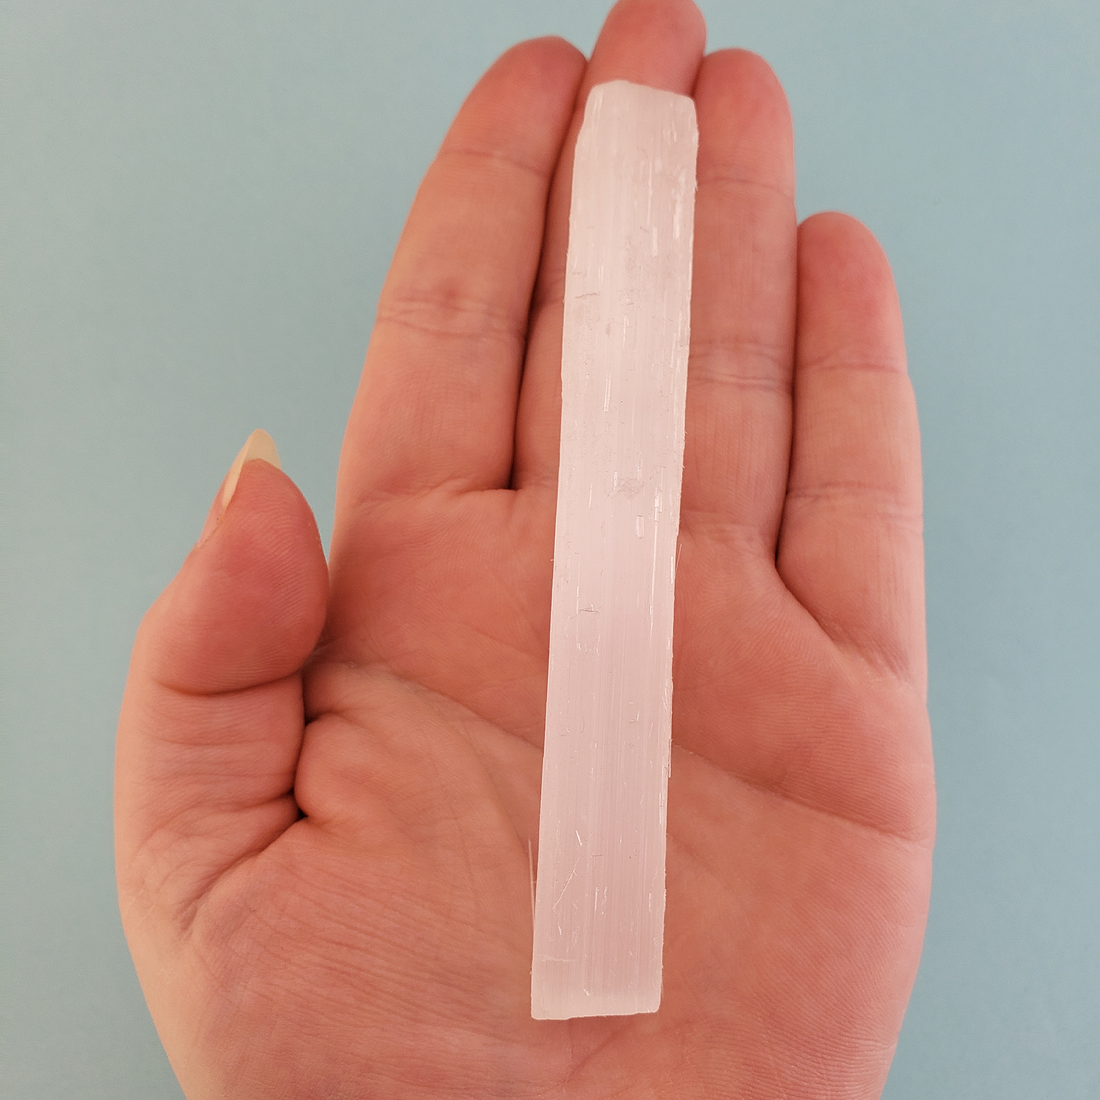 Rough Selenite Crystal Rough Stick - One 3.75 Inch Stick - Against Blue Background